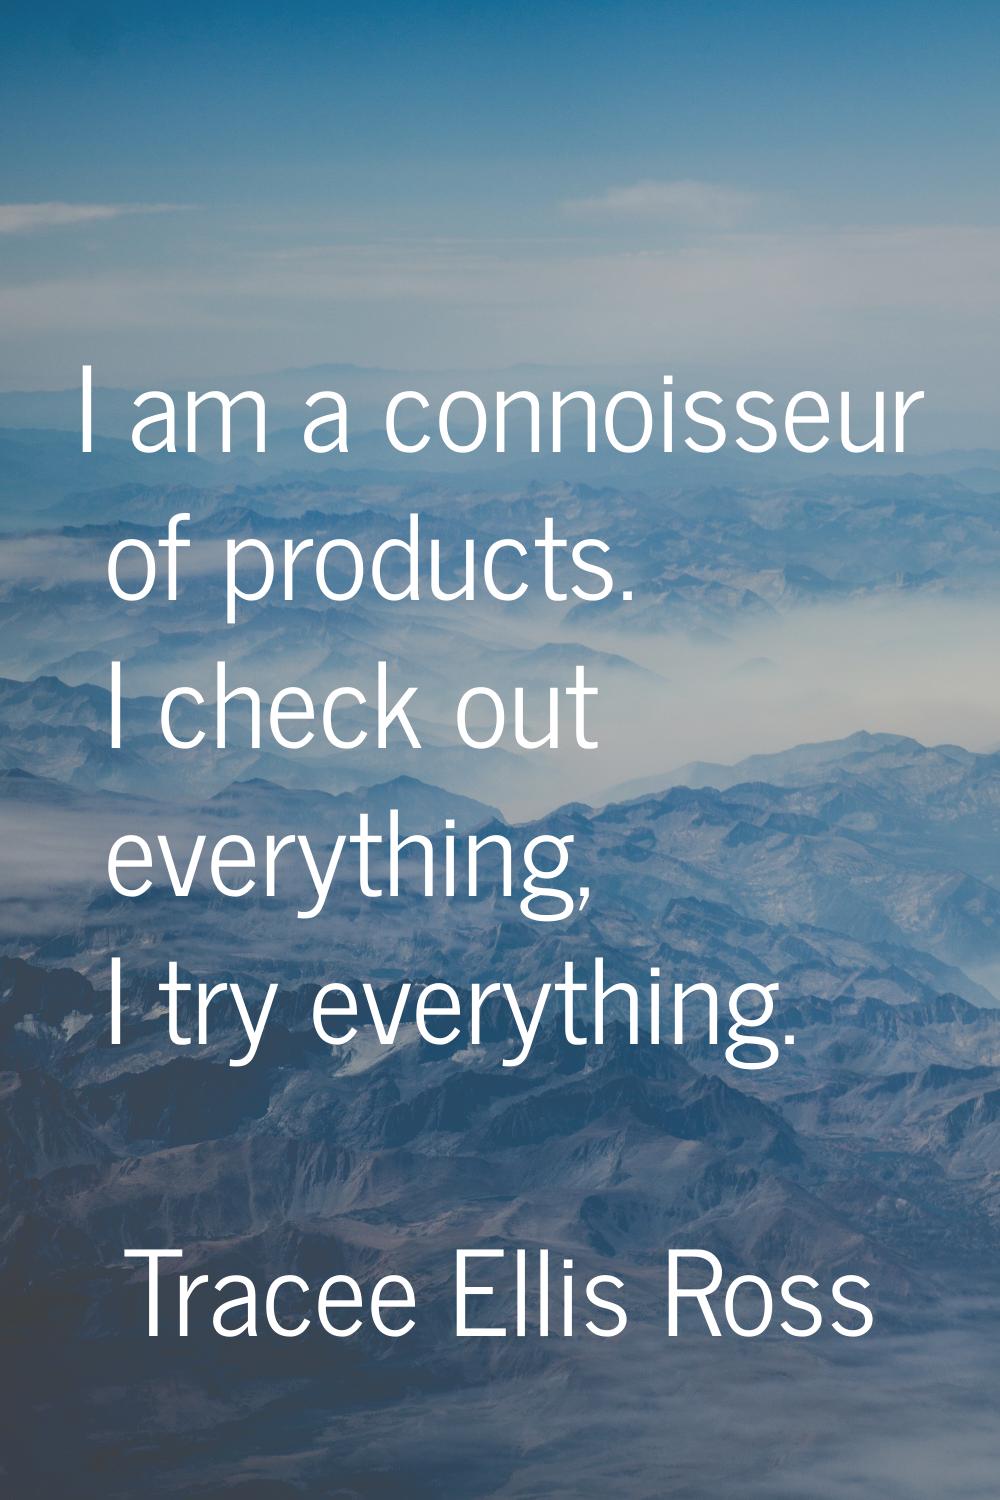 I am a connoisseur of products. I check out everything, I try everything.